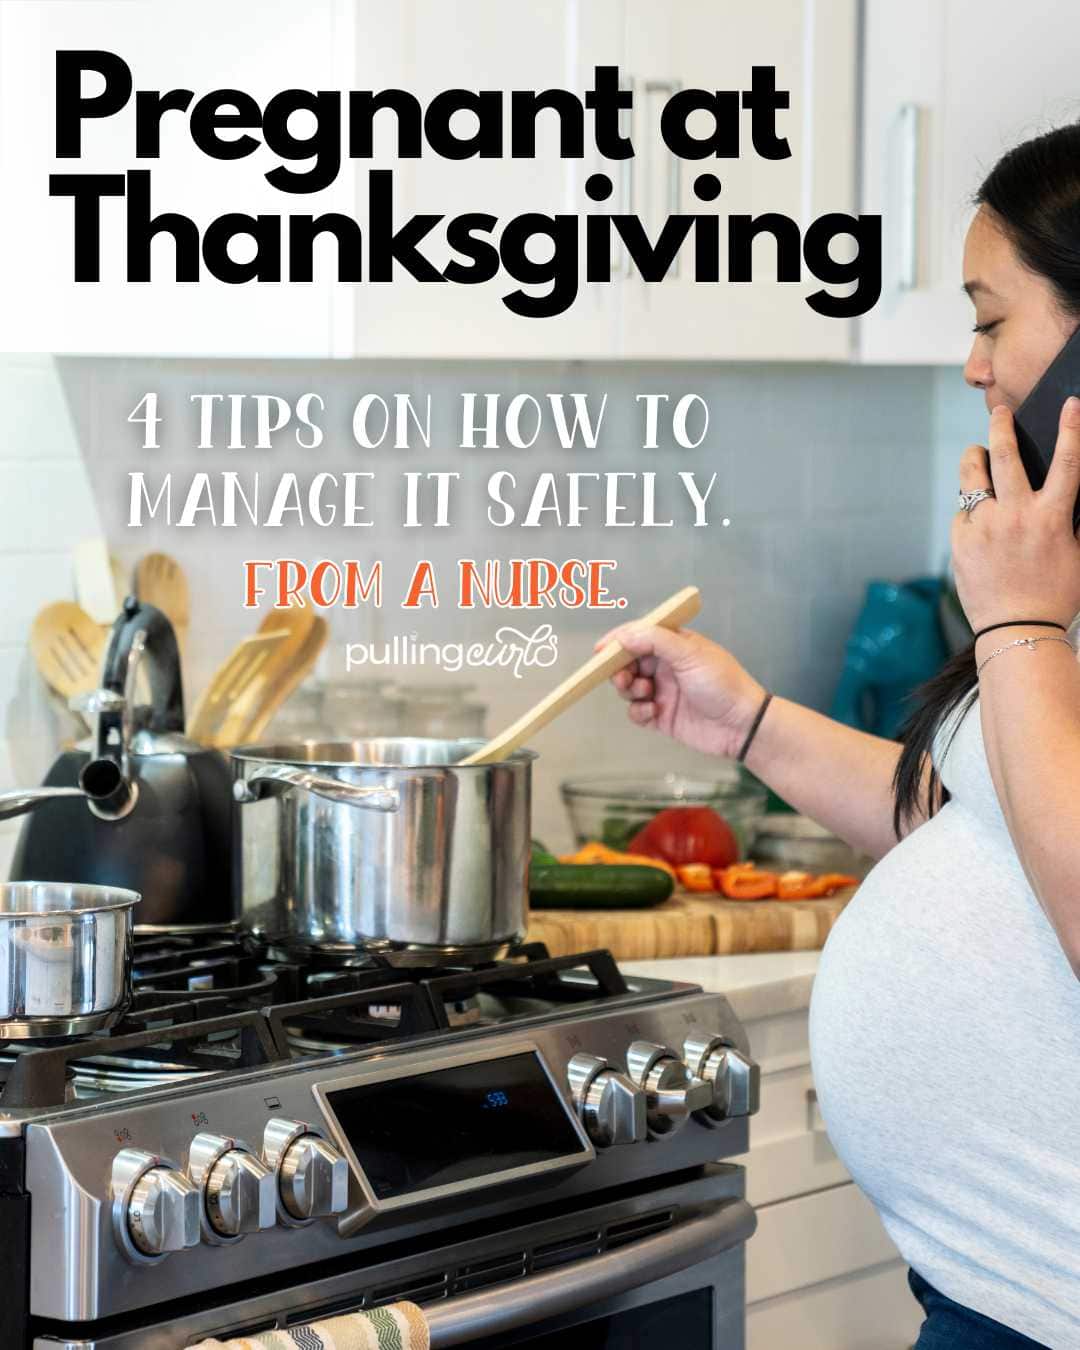 Pregnant at Thanksgiving / tips on how to do it safely from a nurse / pregnant woman stirring pots over the stove. via @pullingcurls